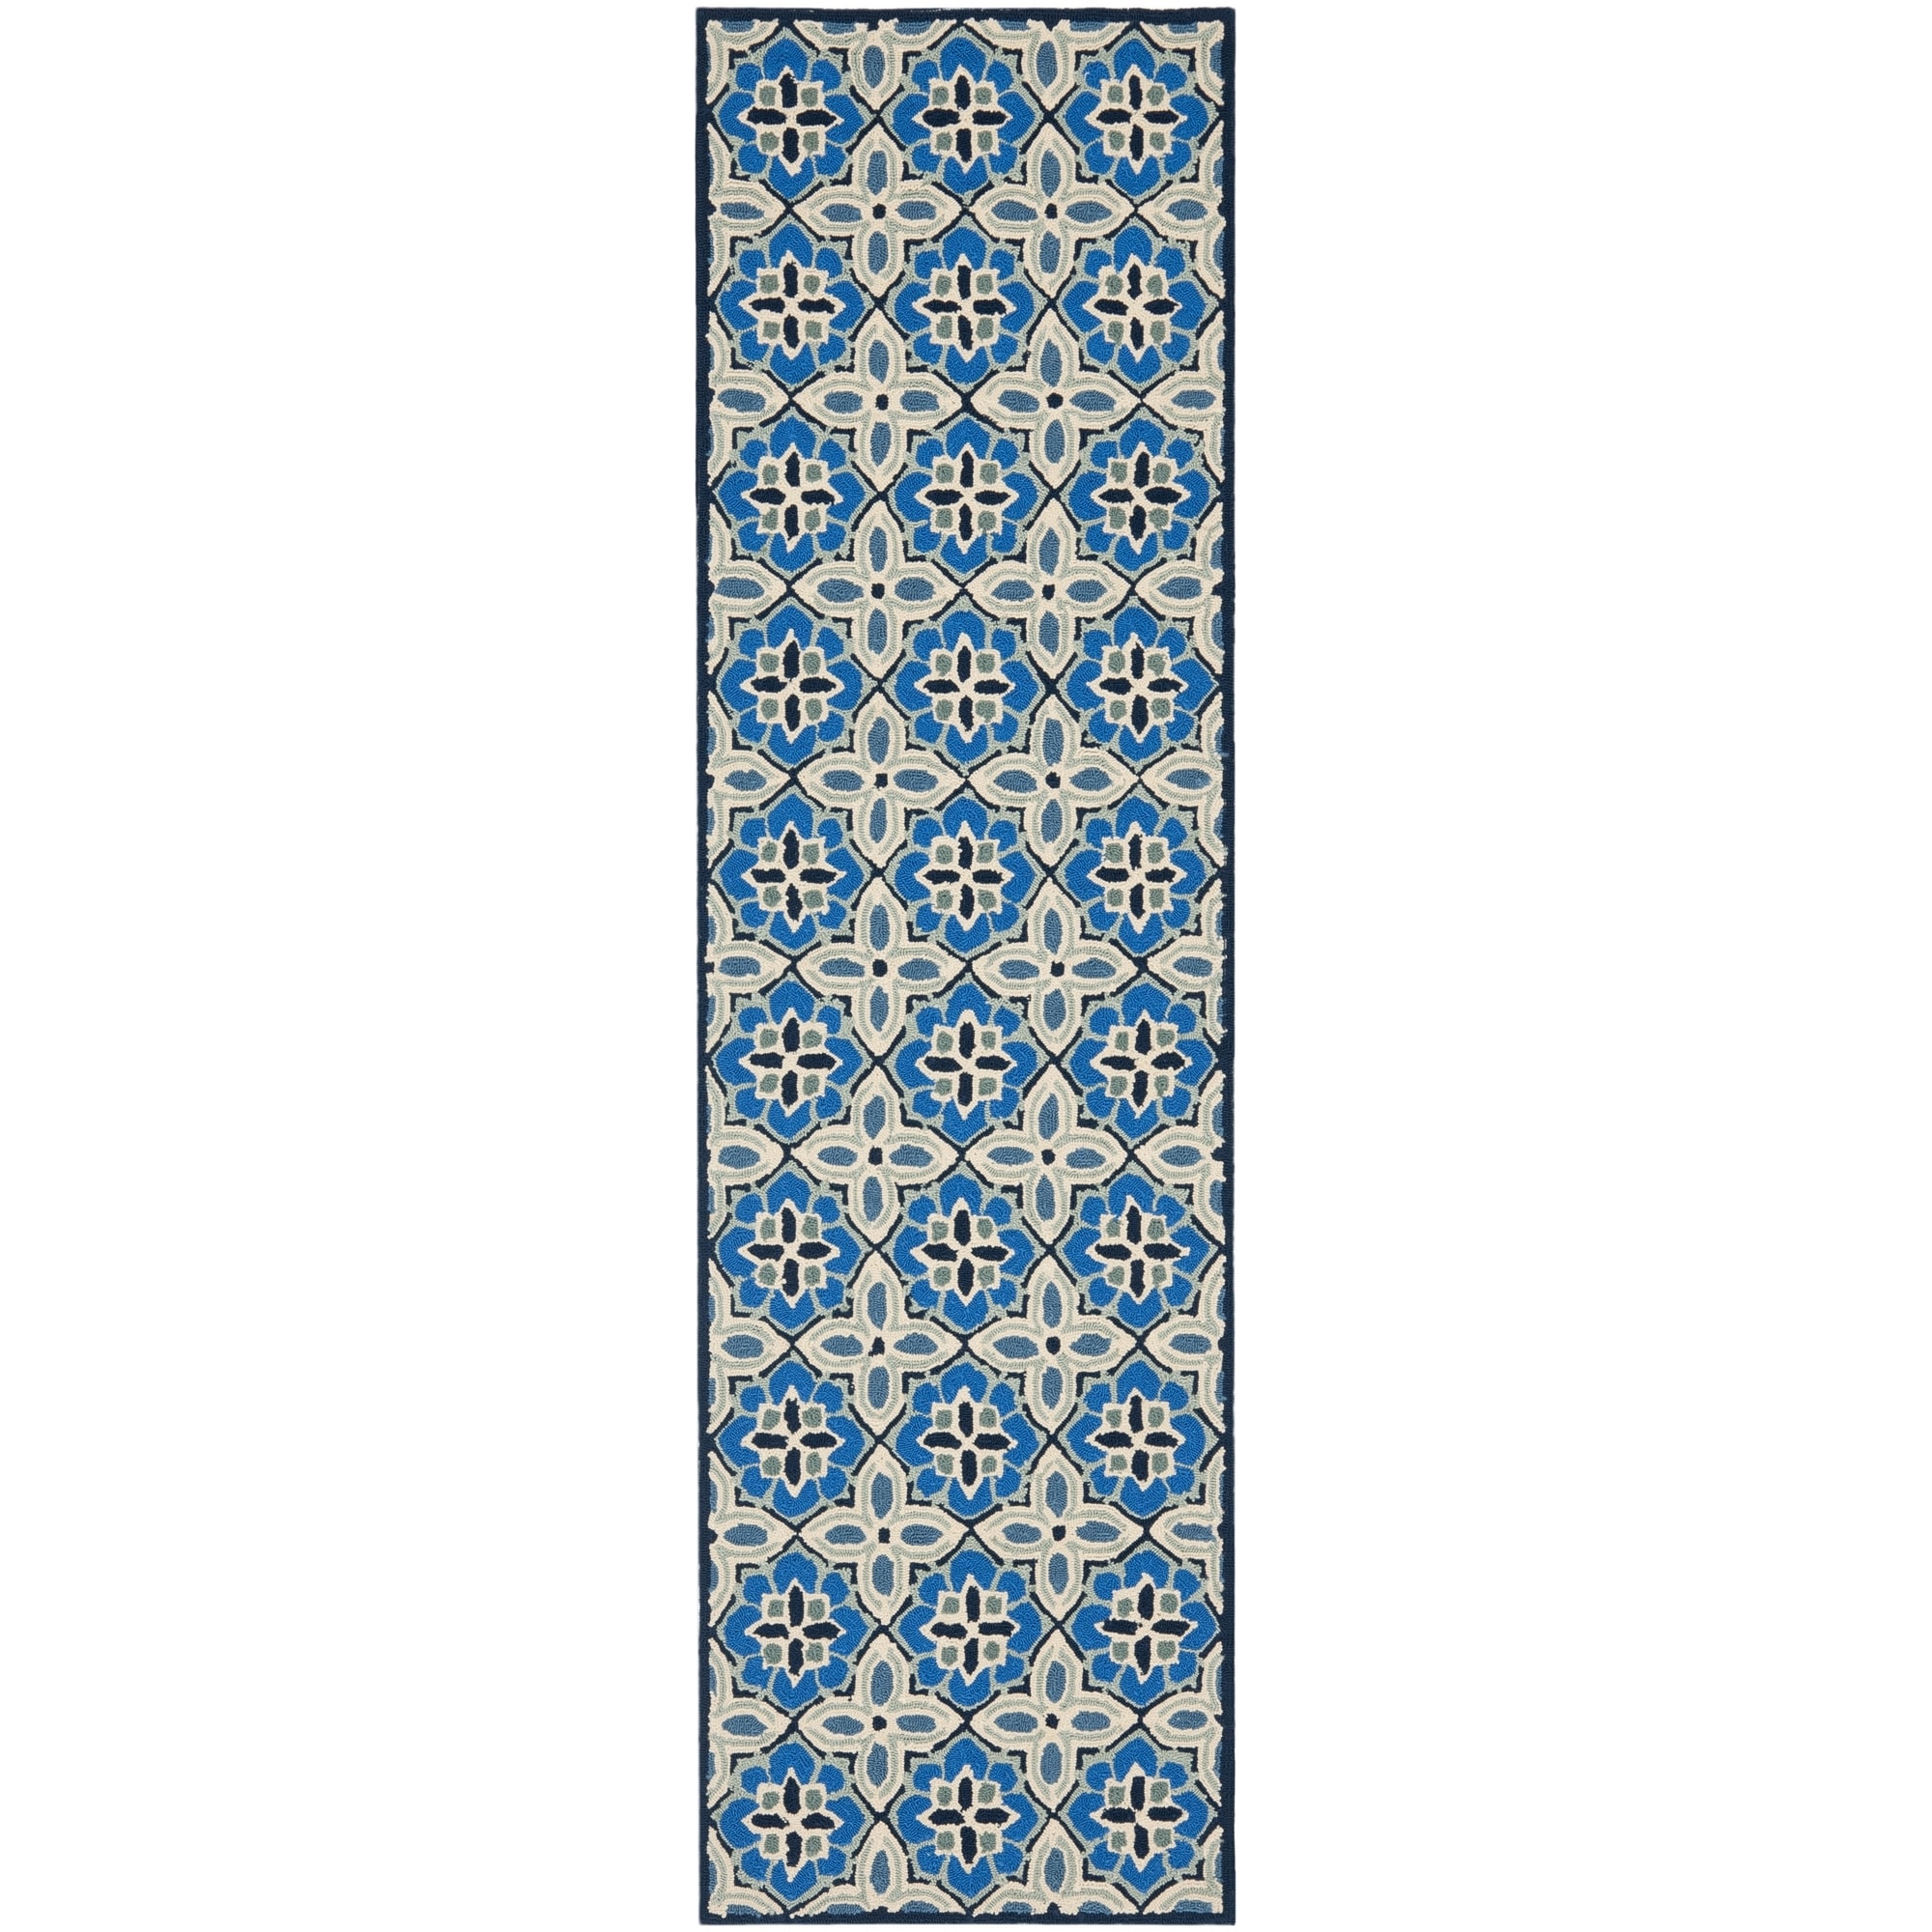 Safavieh Four Seasons Stain Resistant Hand hooked Blue Rug (23 X 8)